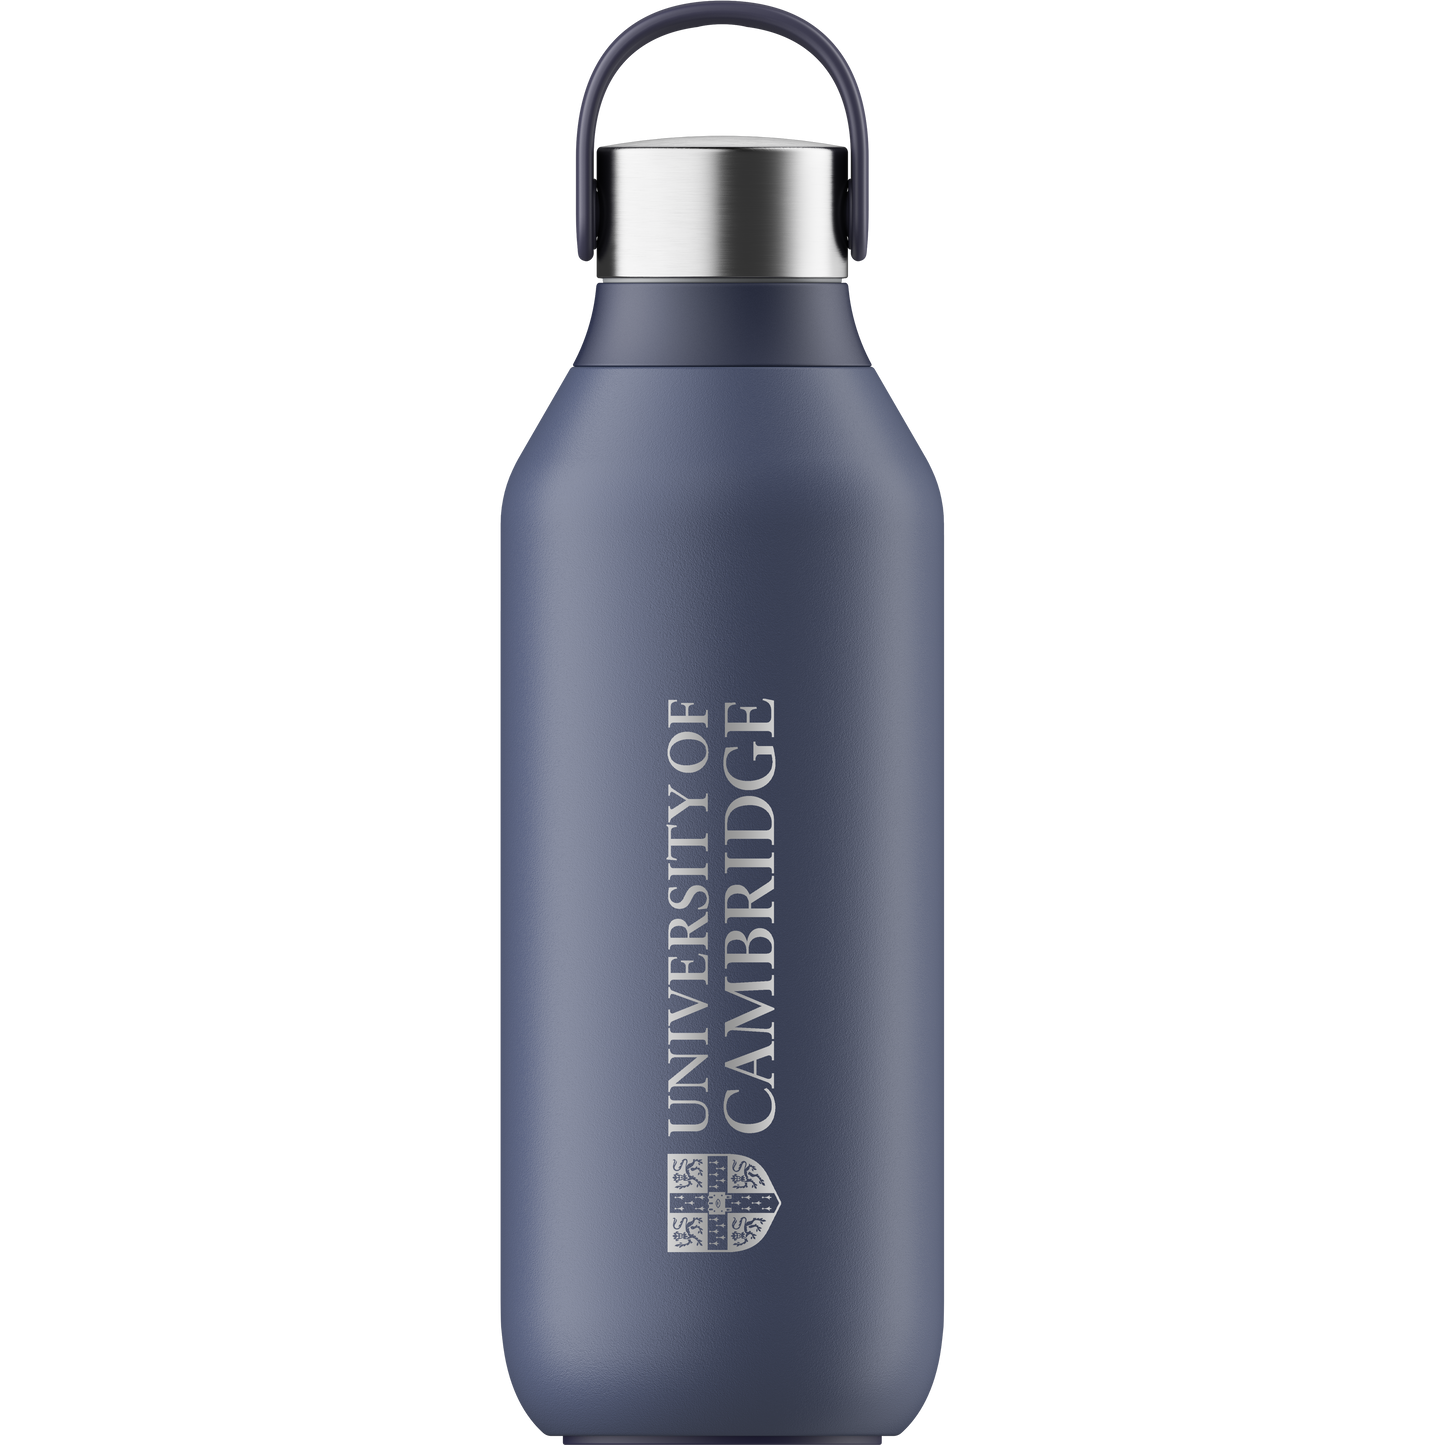 University of Cambridge Chilly's Waterbottle